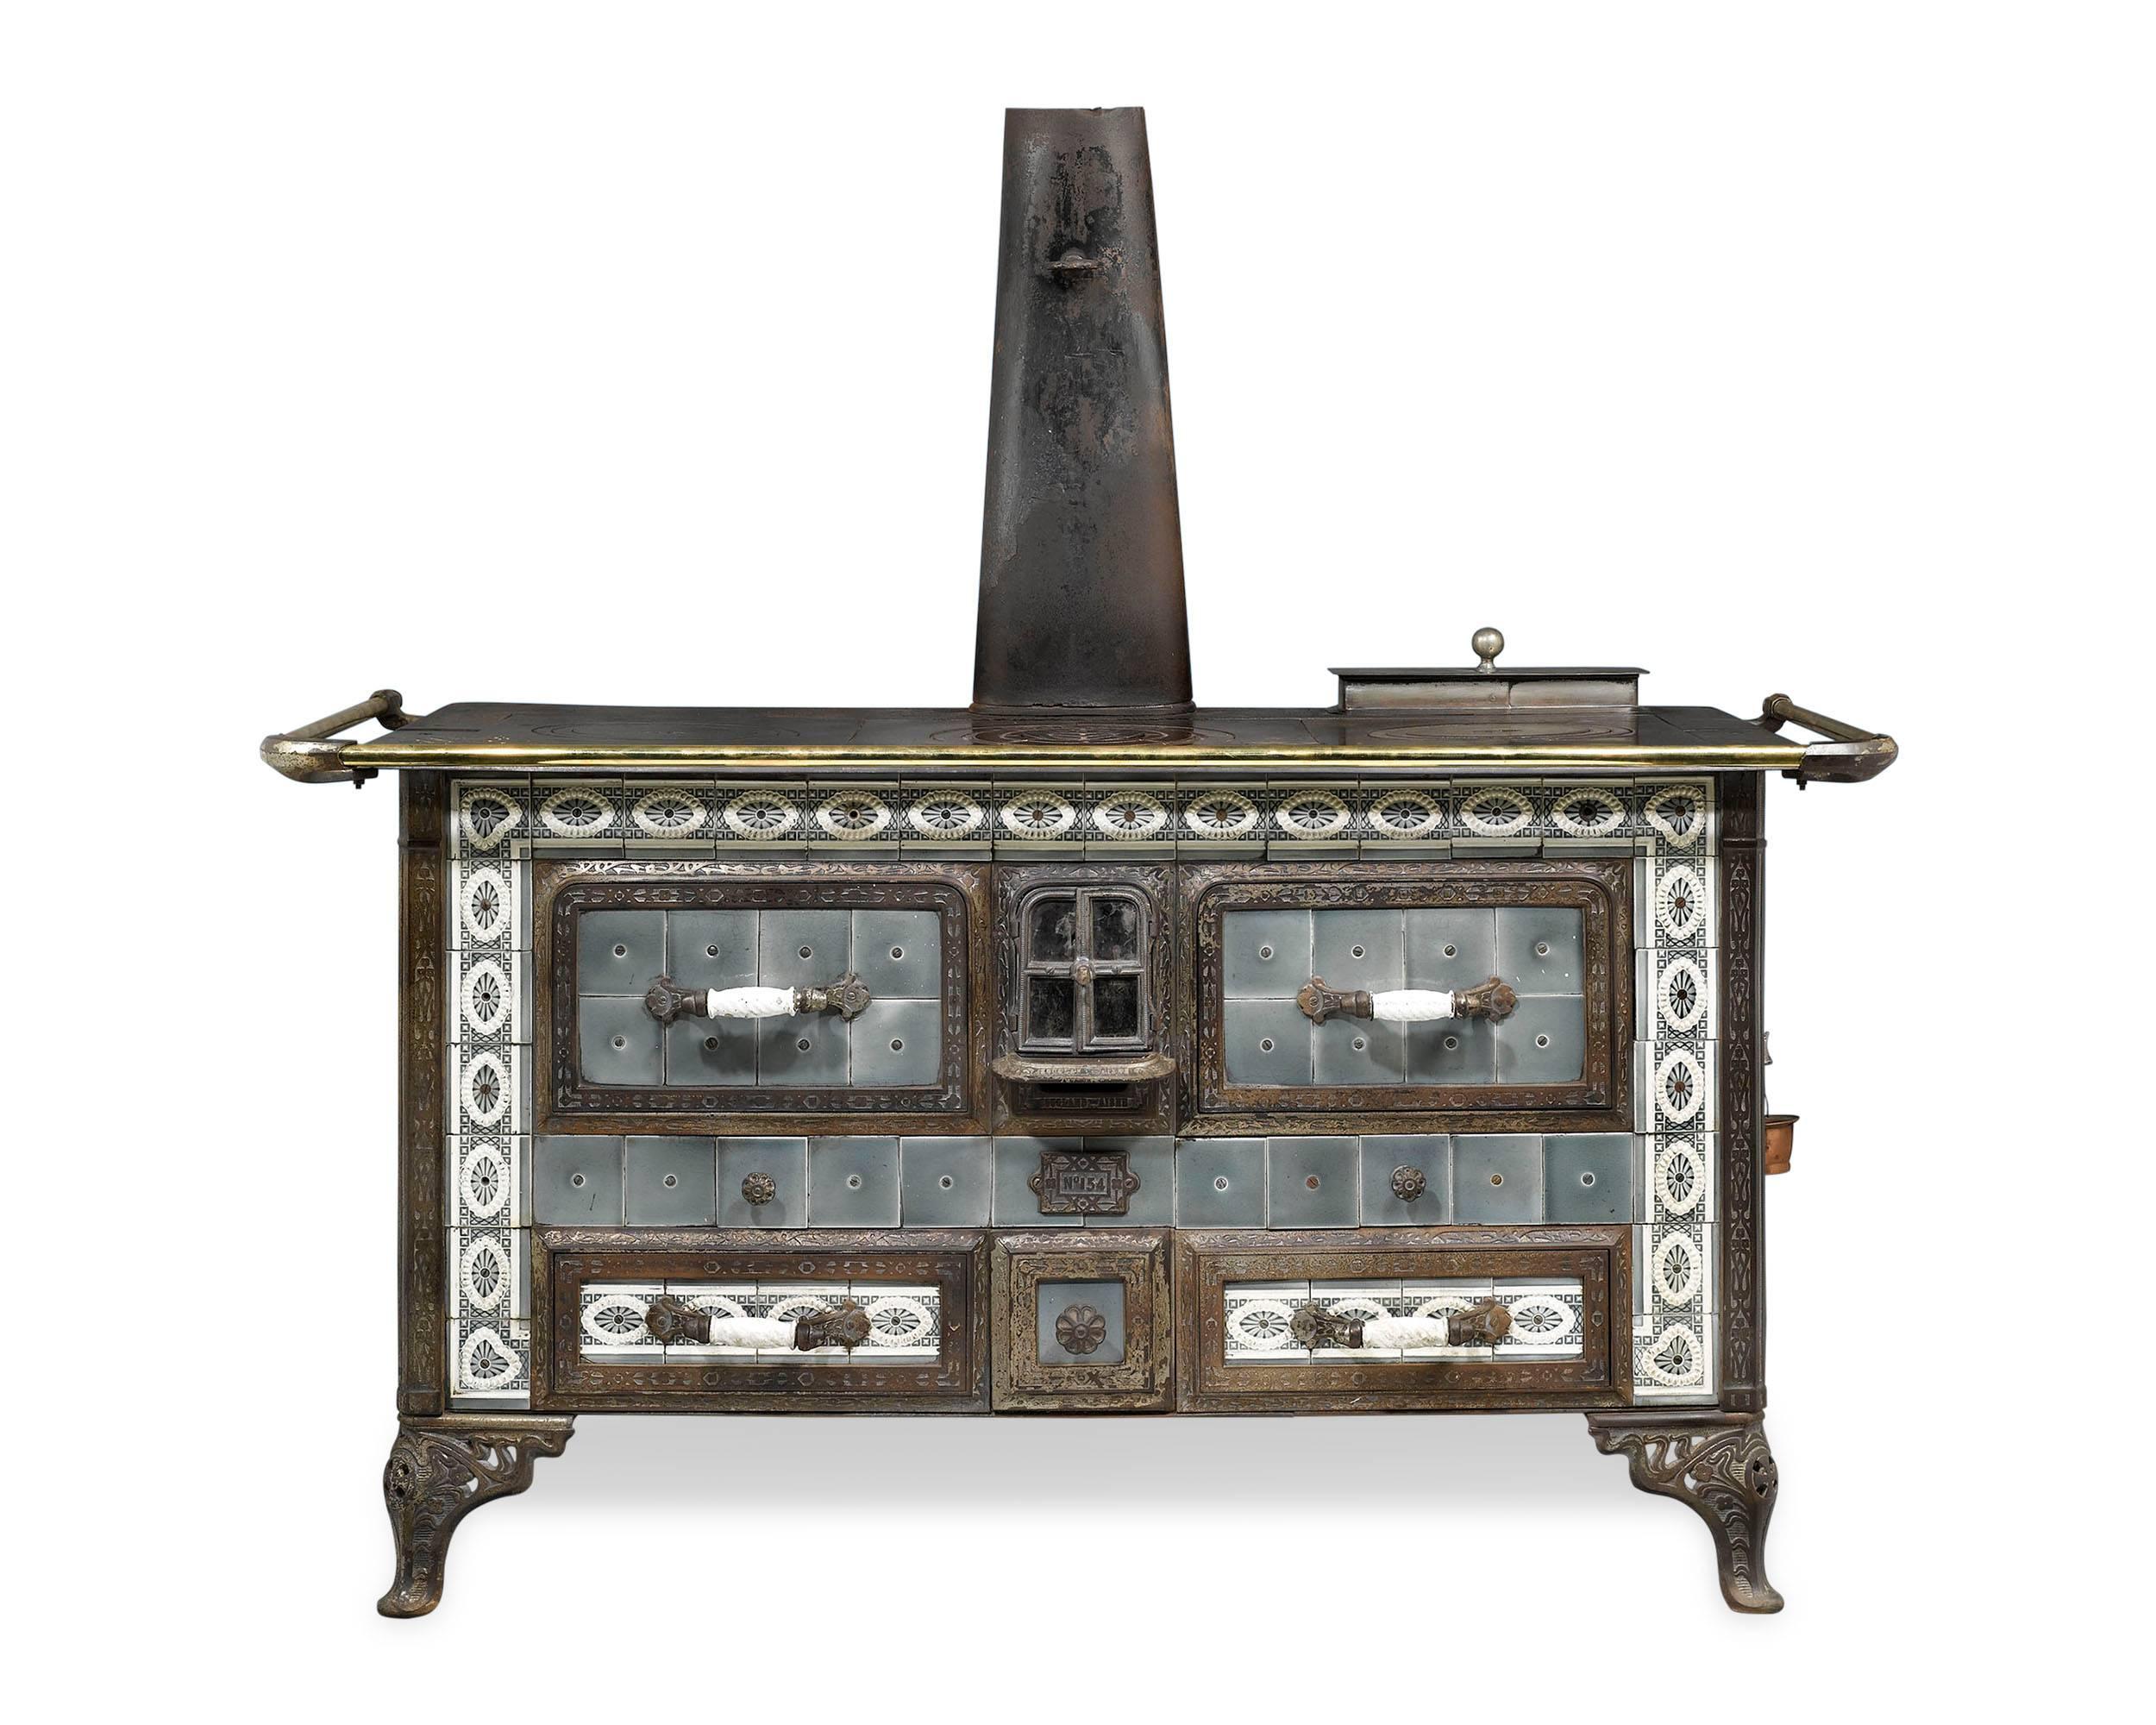 This extremely rare and striking Sougland-Aisne stored heat cooker is a work of outstanding design. This Art Nouveau-period cast iron stove could either be fired with charcoal or wood, and has three “burners” on top with covers and concentric